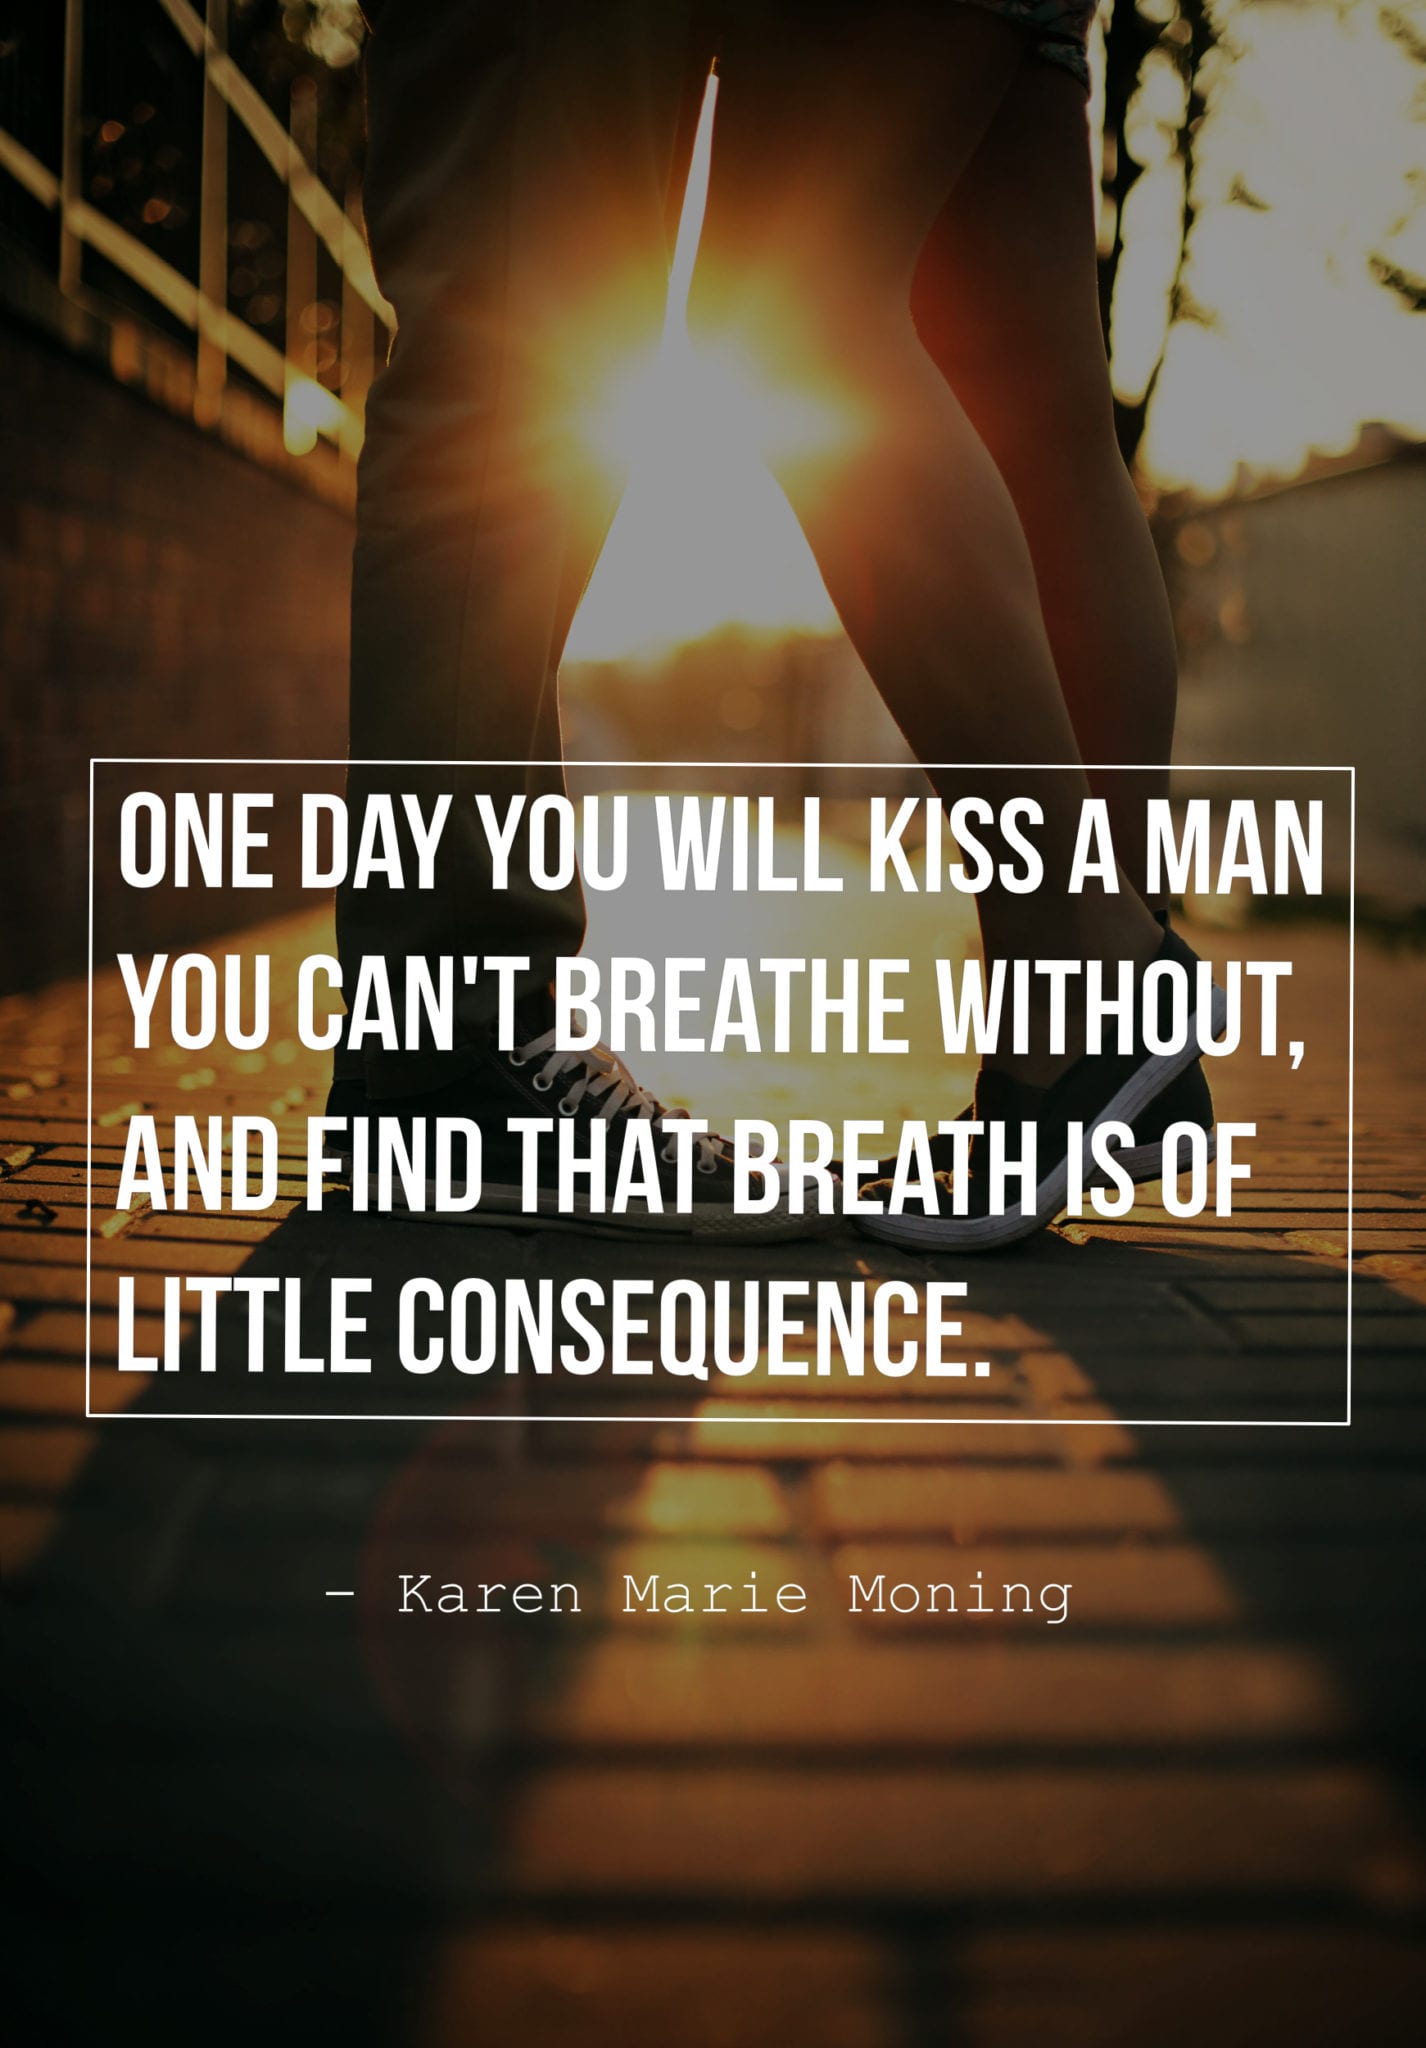 One day you will kiss a man you can't breathe without, and find that breath is of little consequence.